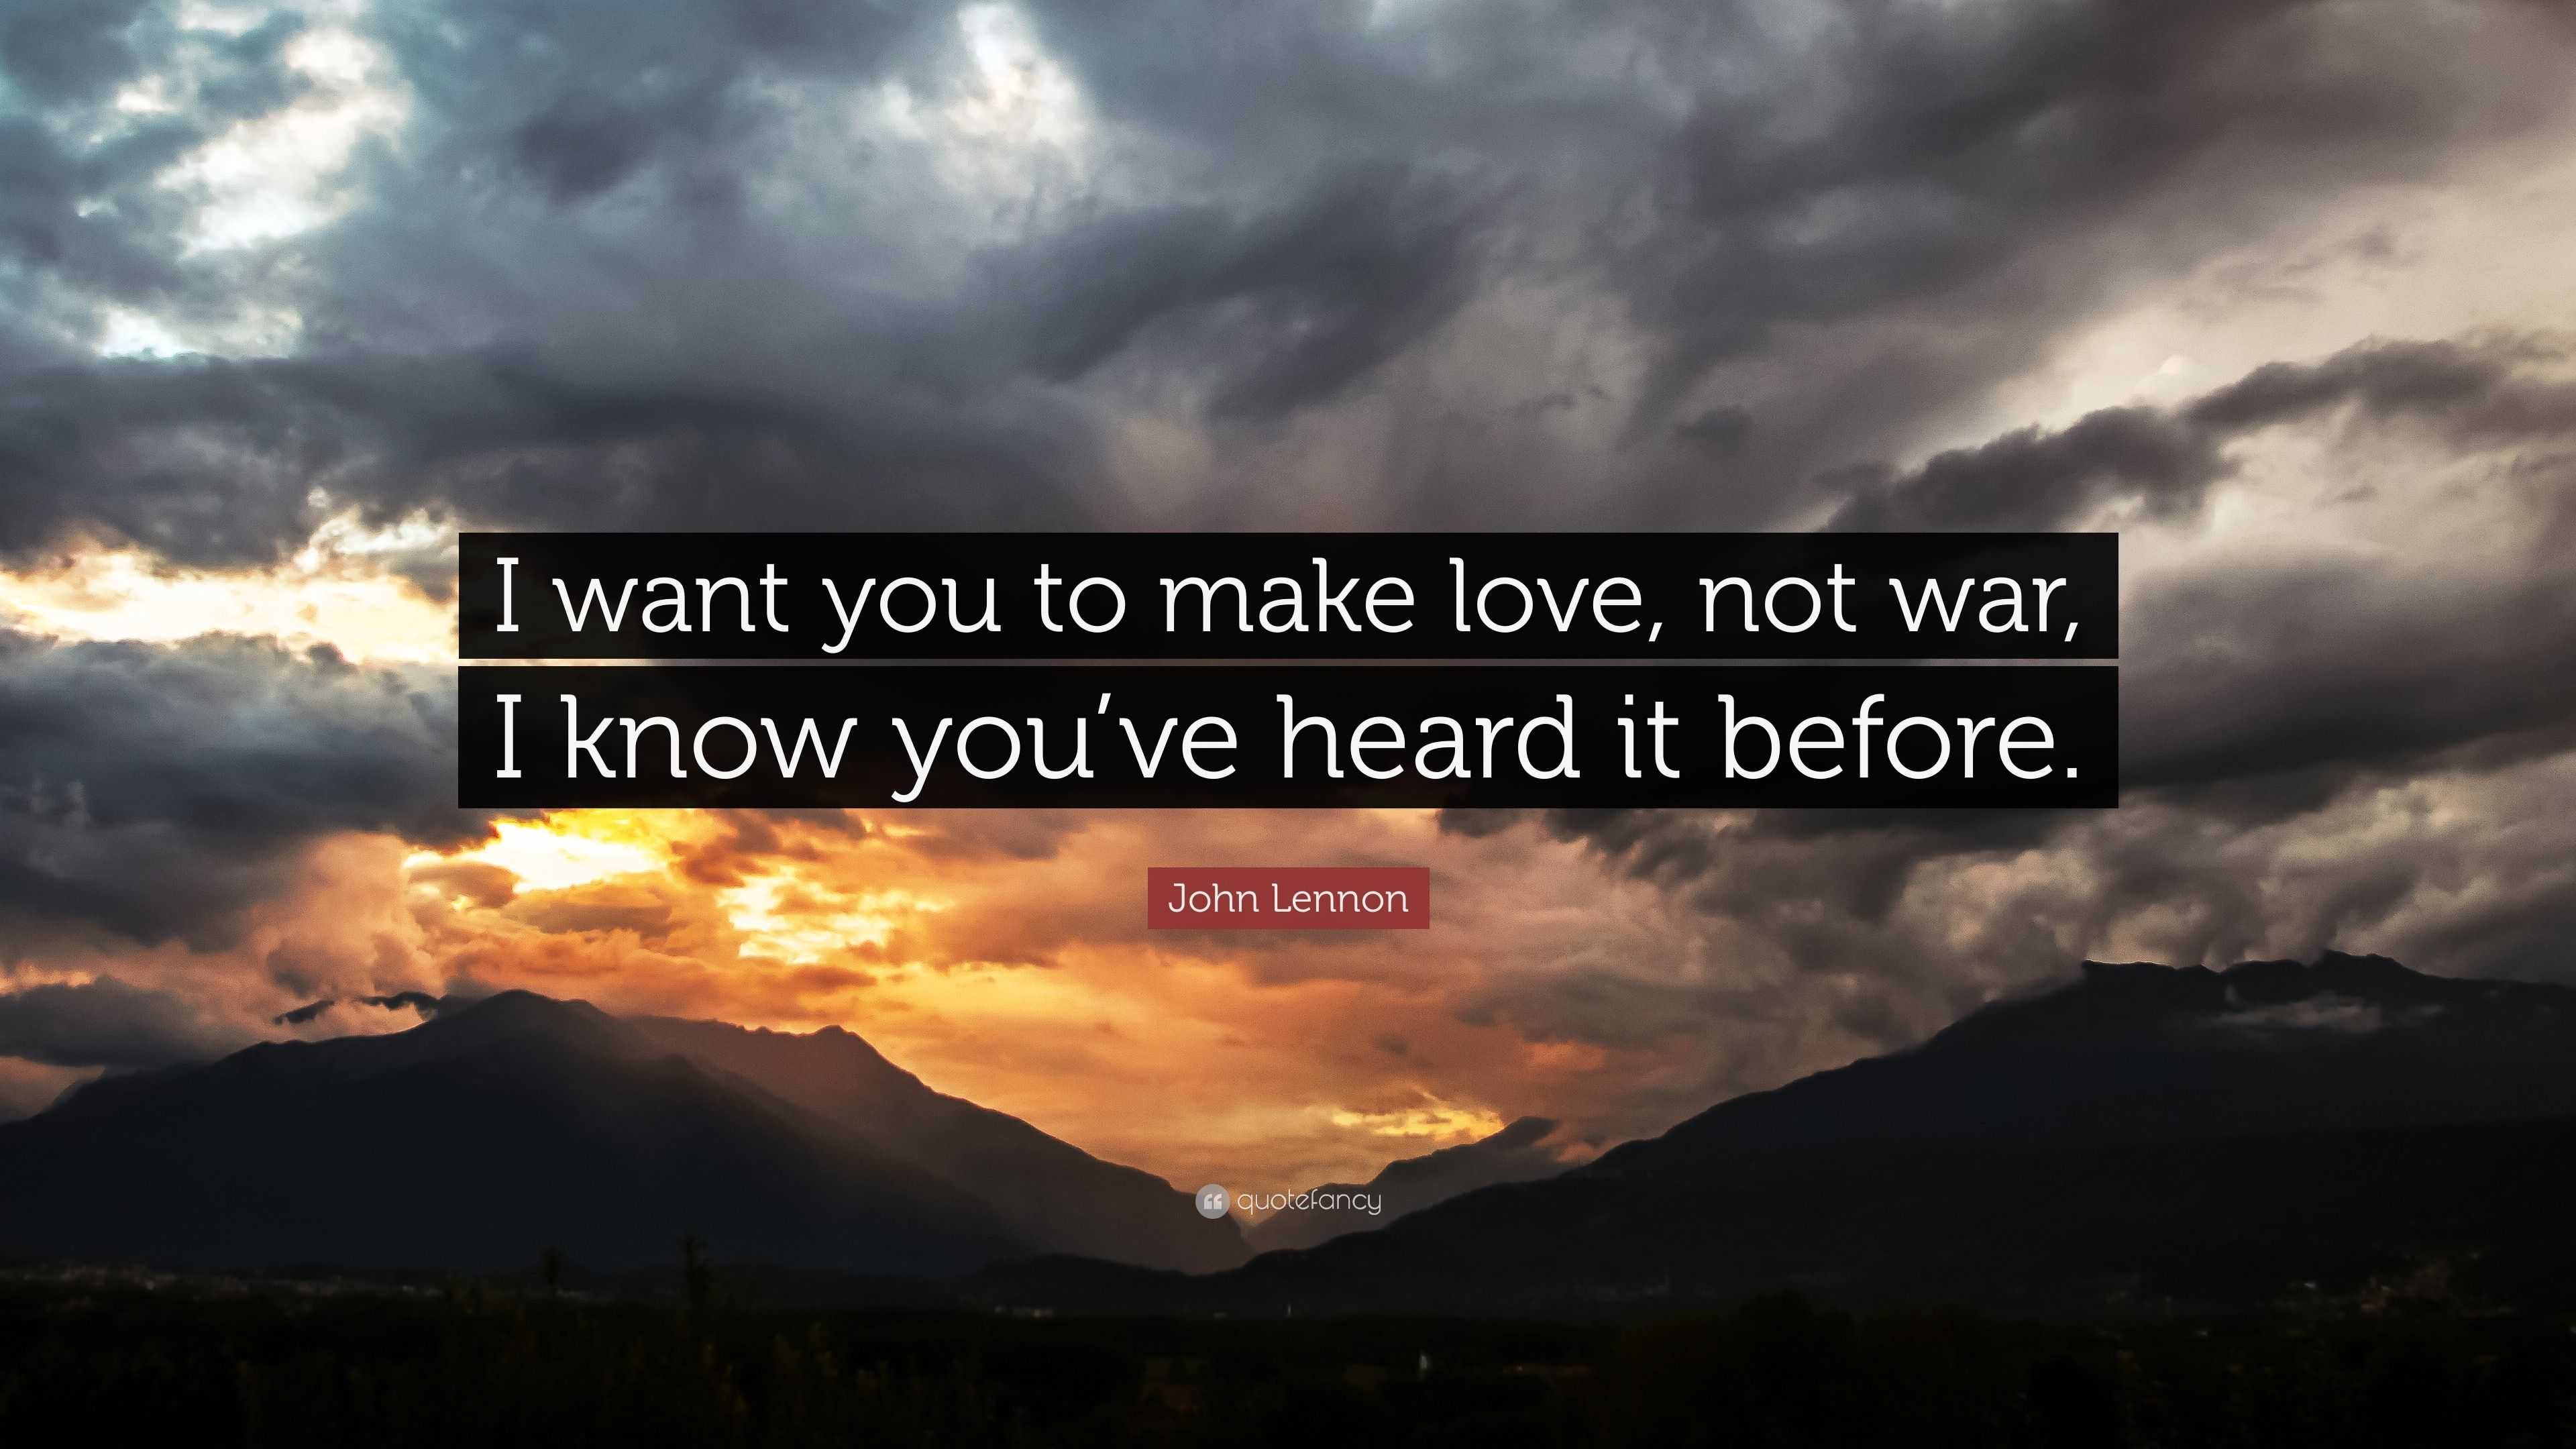 John Lennon Quote “I want you to make love not war I